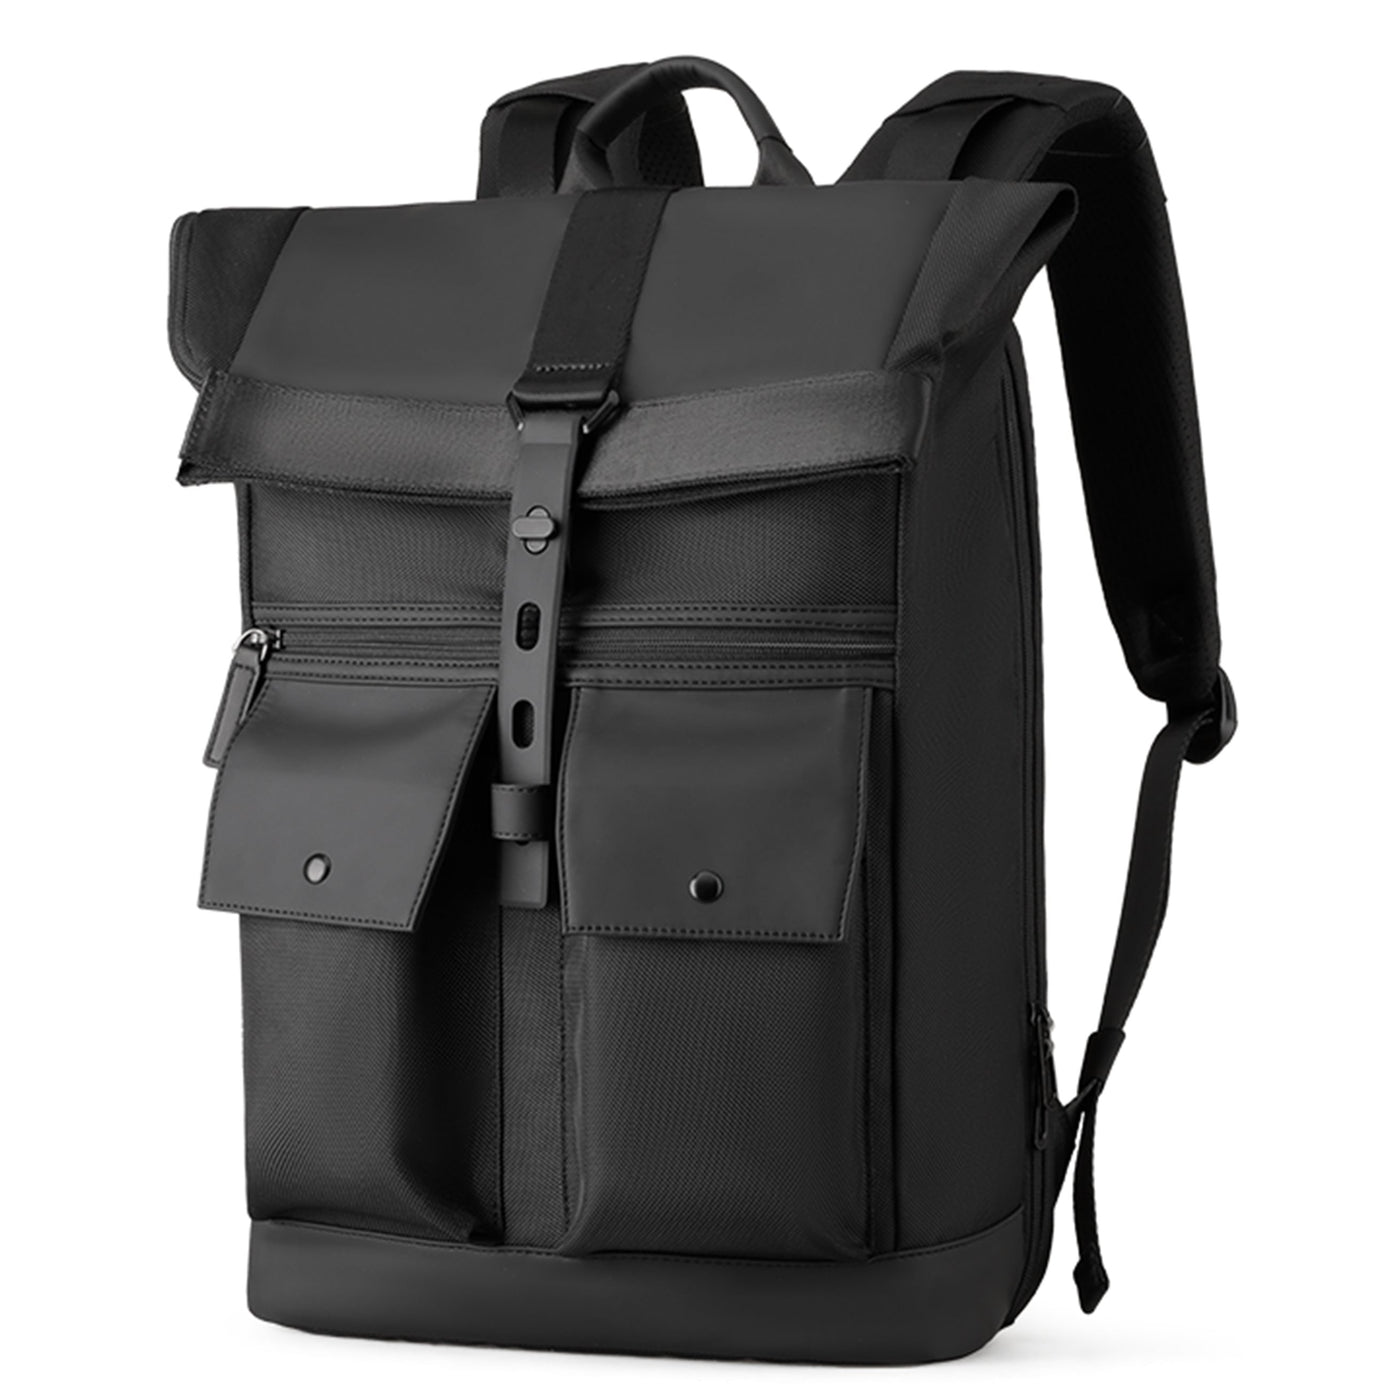 Mark Ryden Local Daily Commuter Style Laptop Backpack